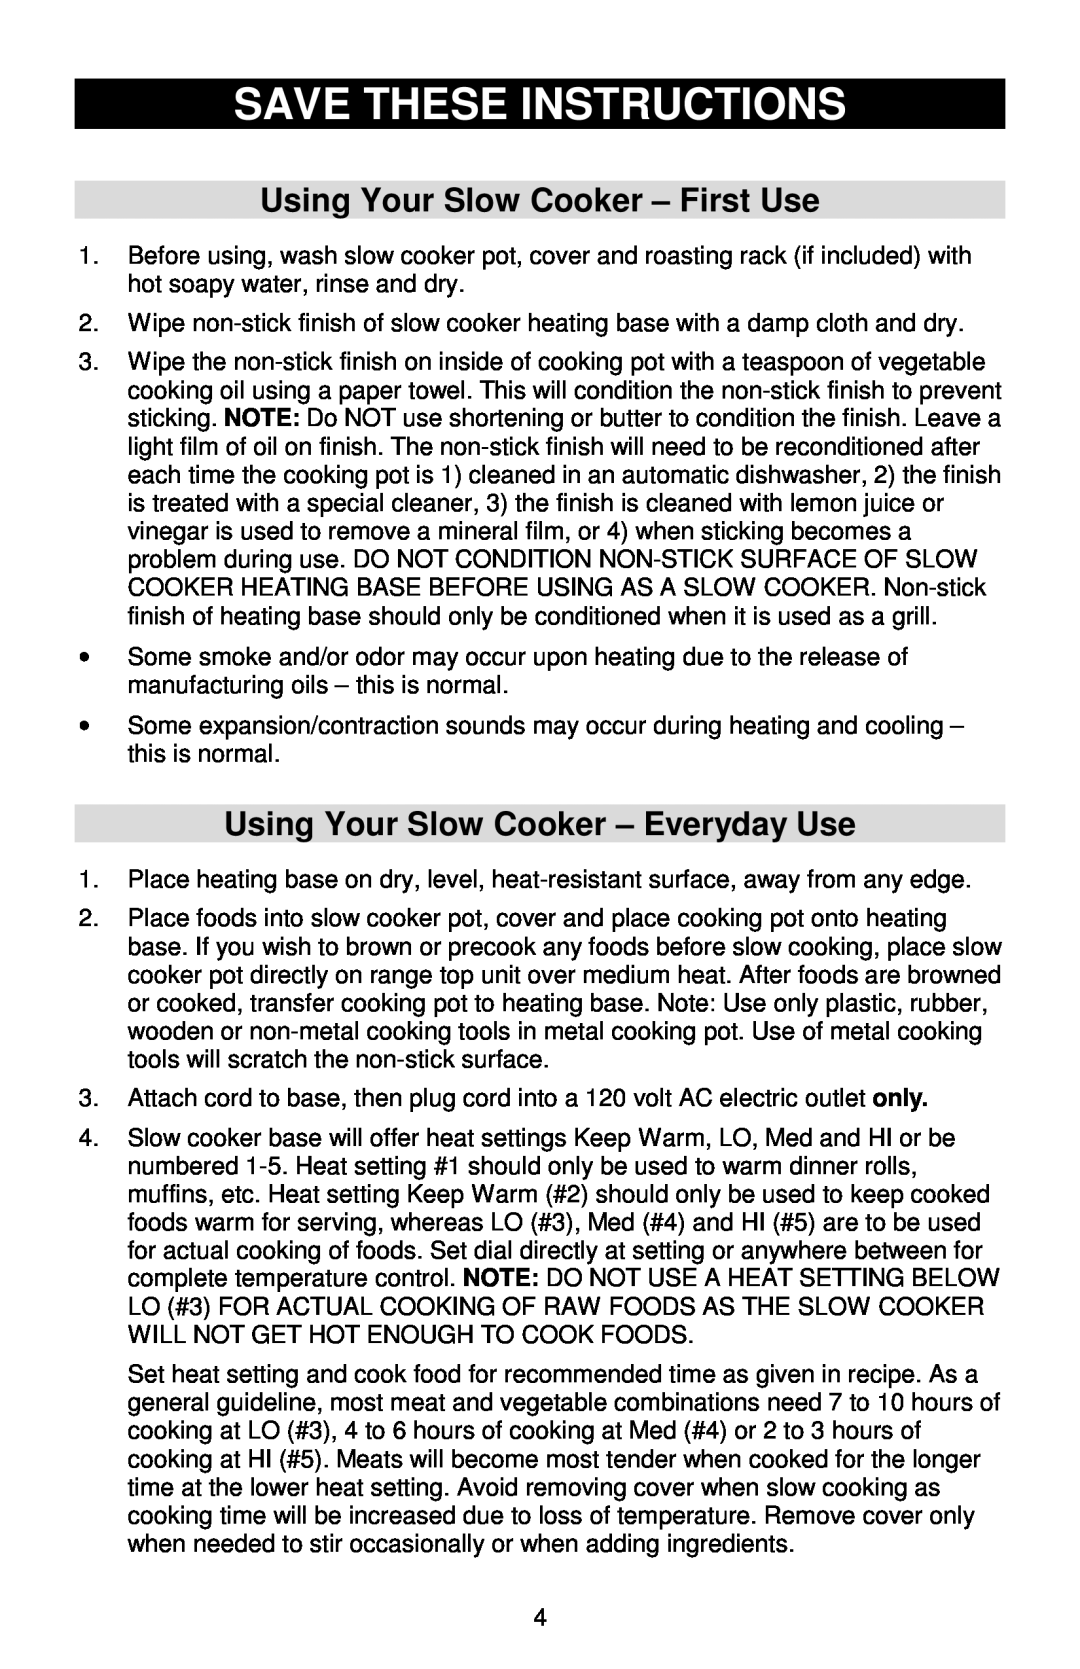 West Bend Cookers Save These Instructions, Using Your Slow Cooker - First Use, Using Your Slow Cooker - Everyday Use 